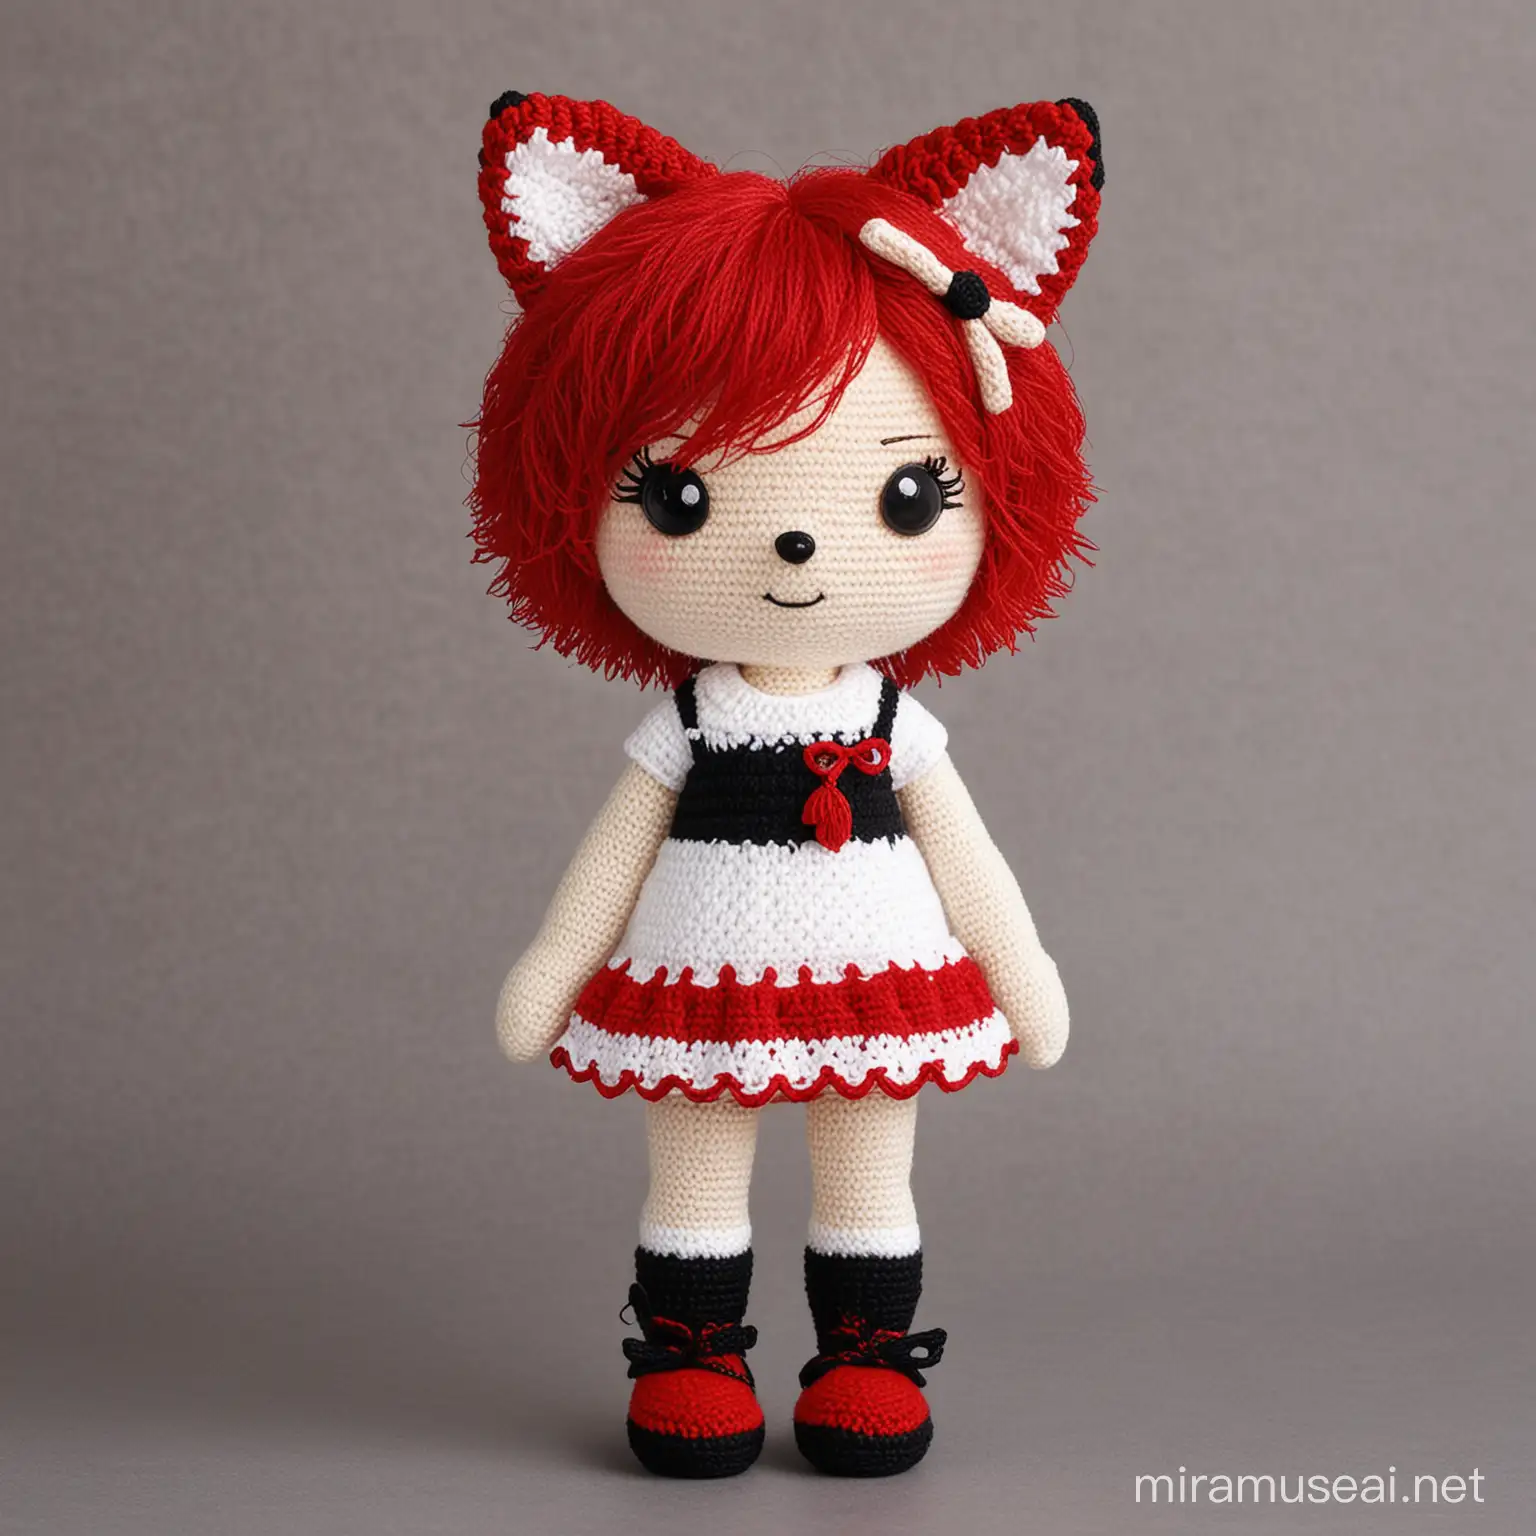 Amigurumi Crochet Baby Girl with Fox Ears in Red and White Dress